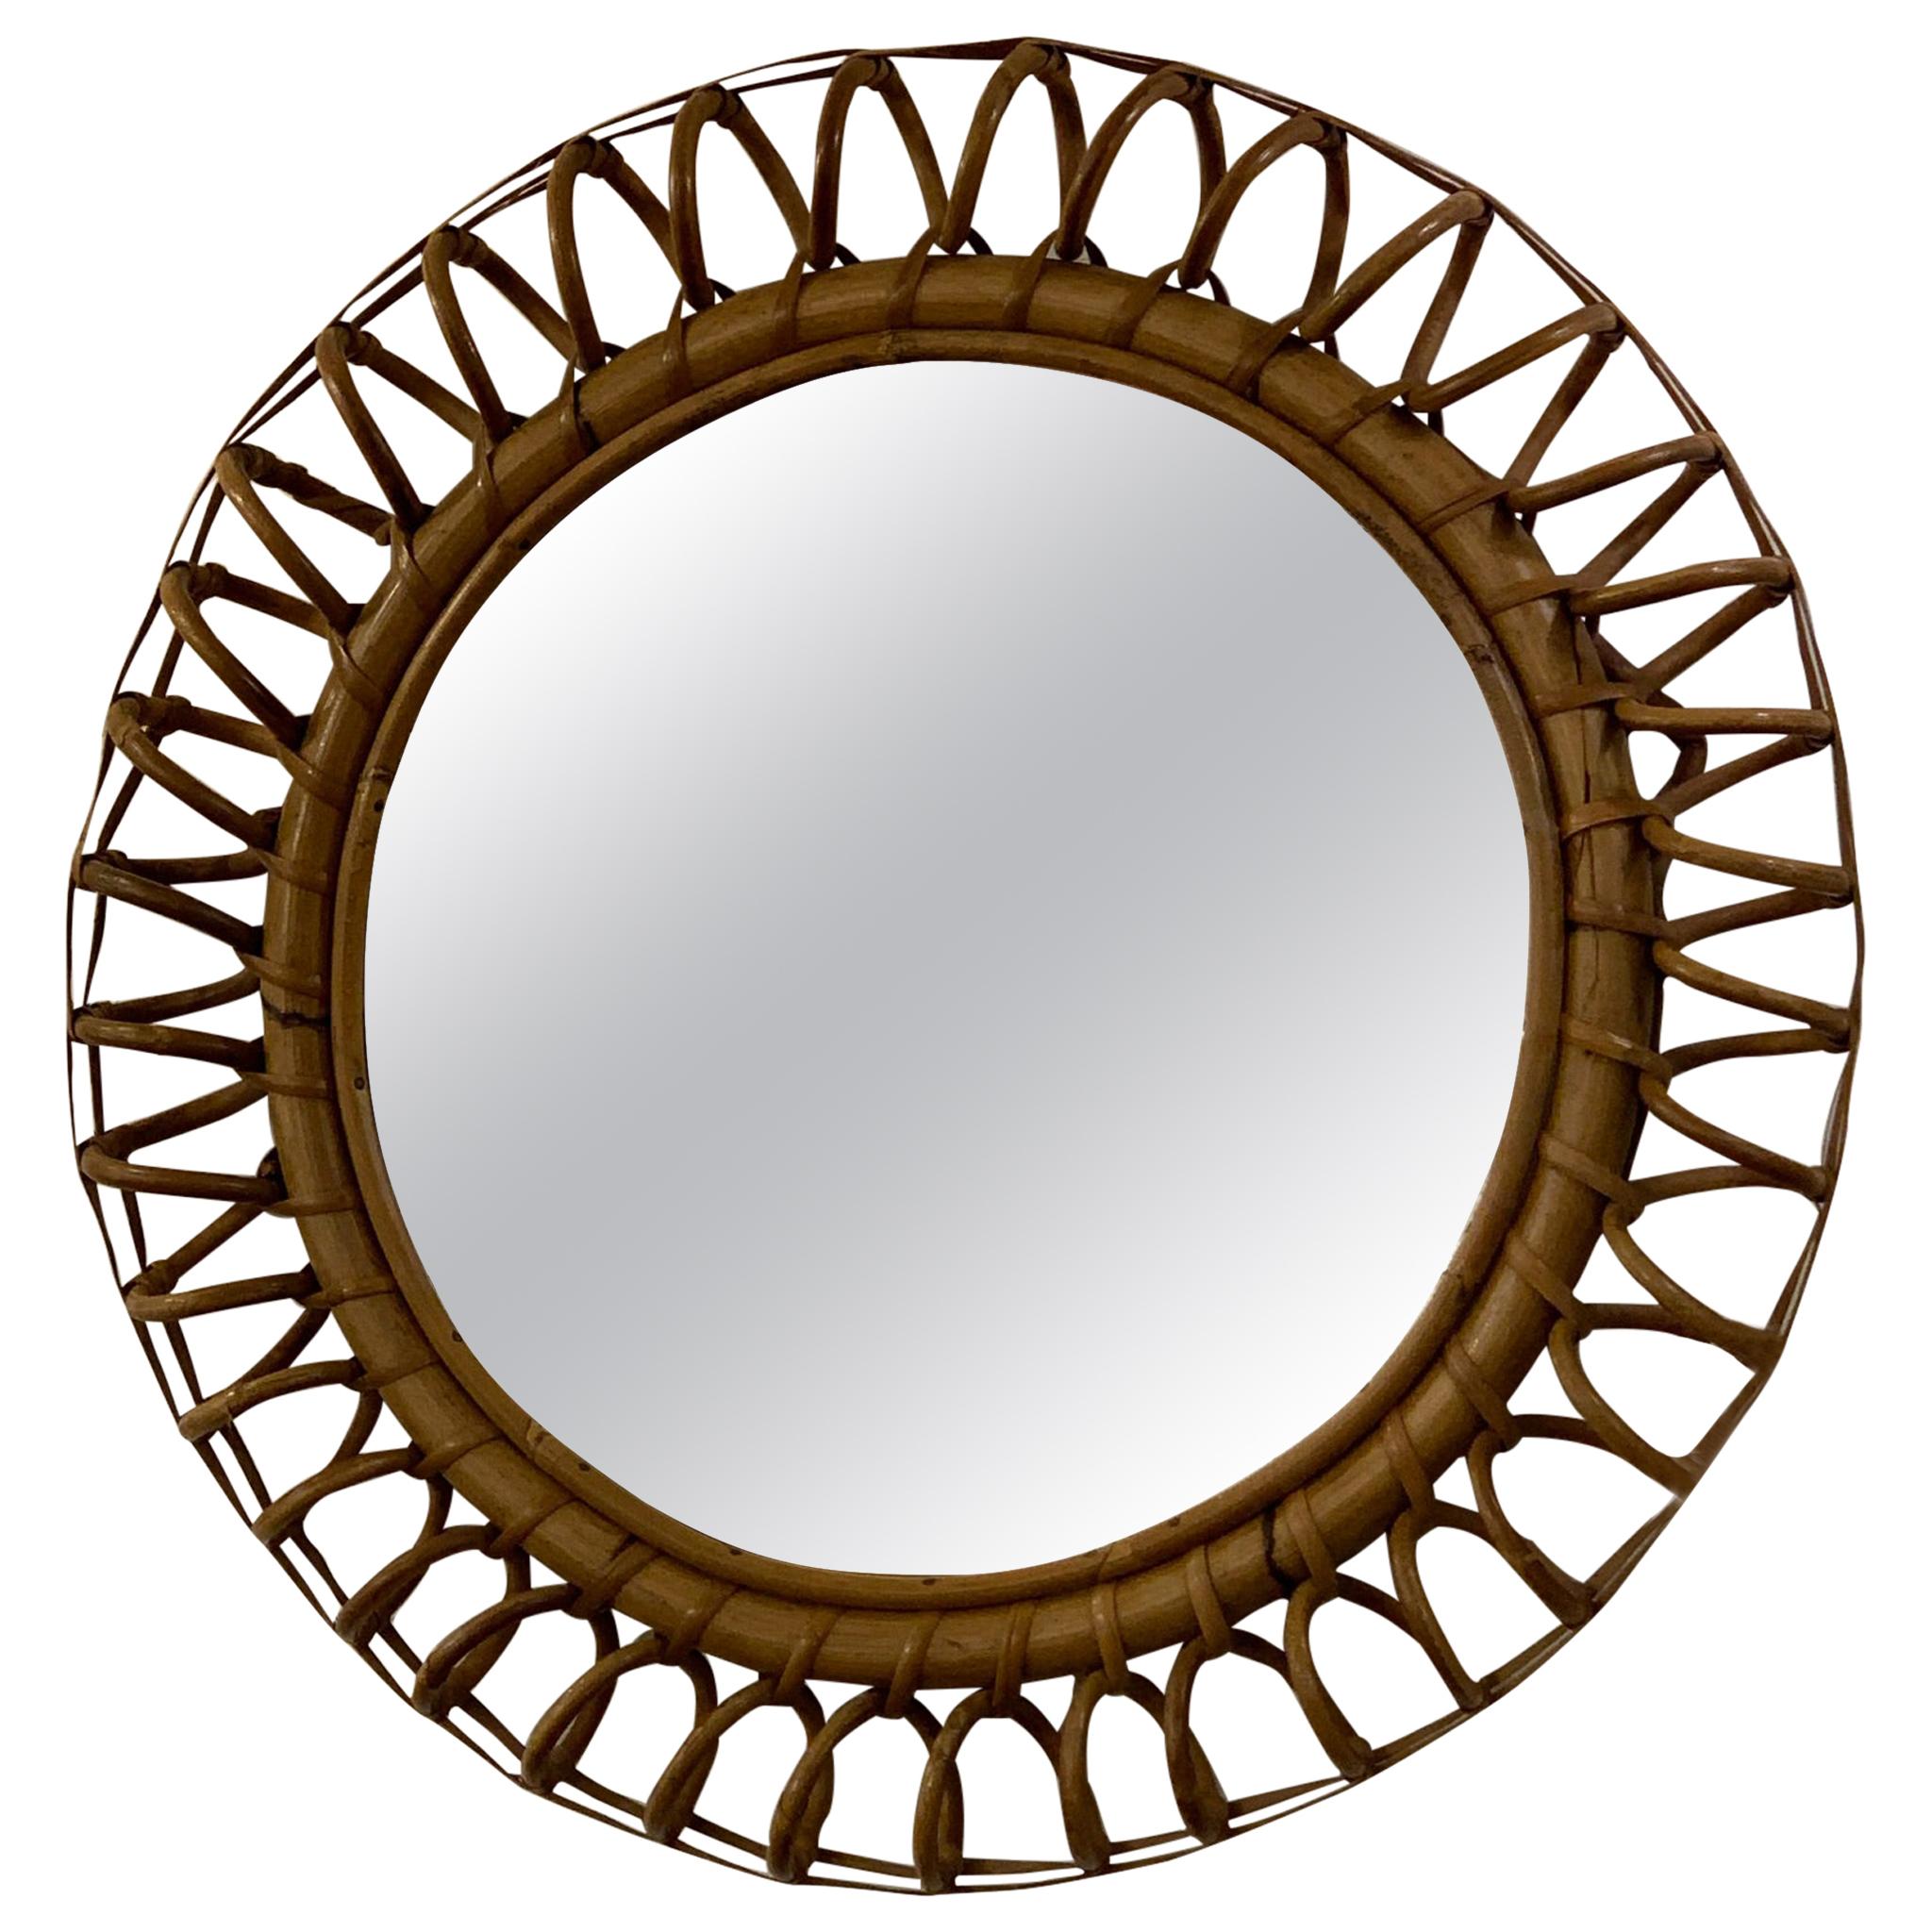 Vintage 1960s Rattan and Bamboo 51 cm Round Wall Mirror by Franco Albini